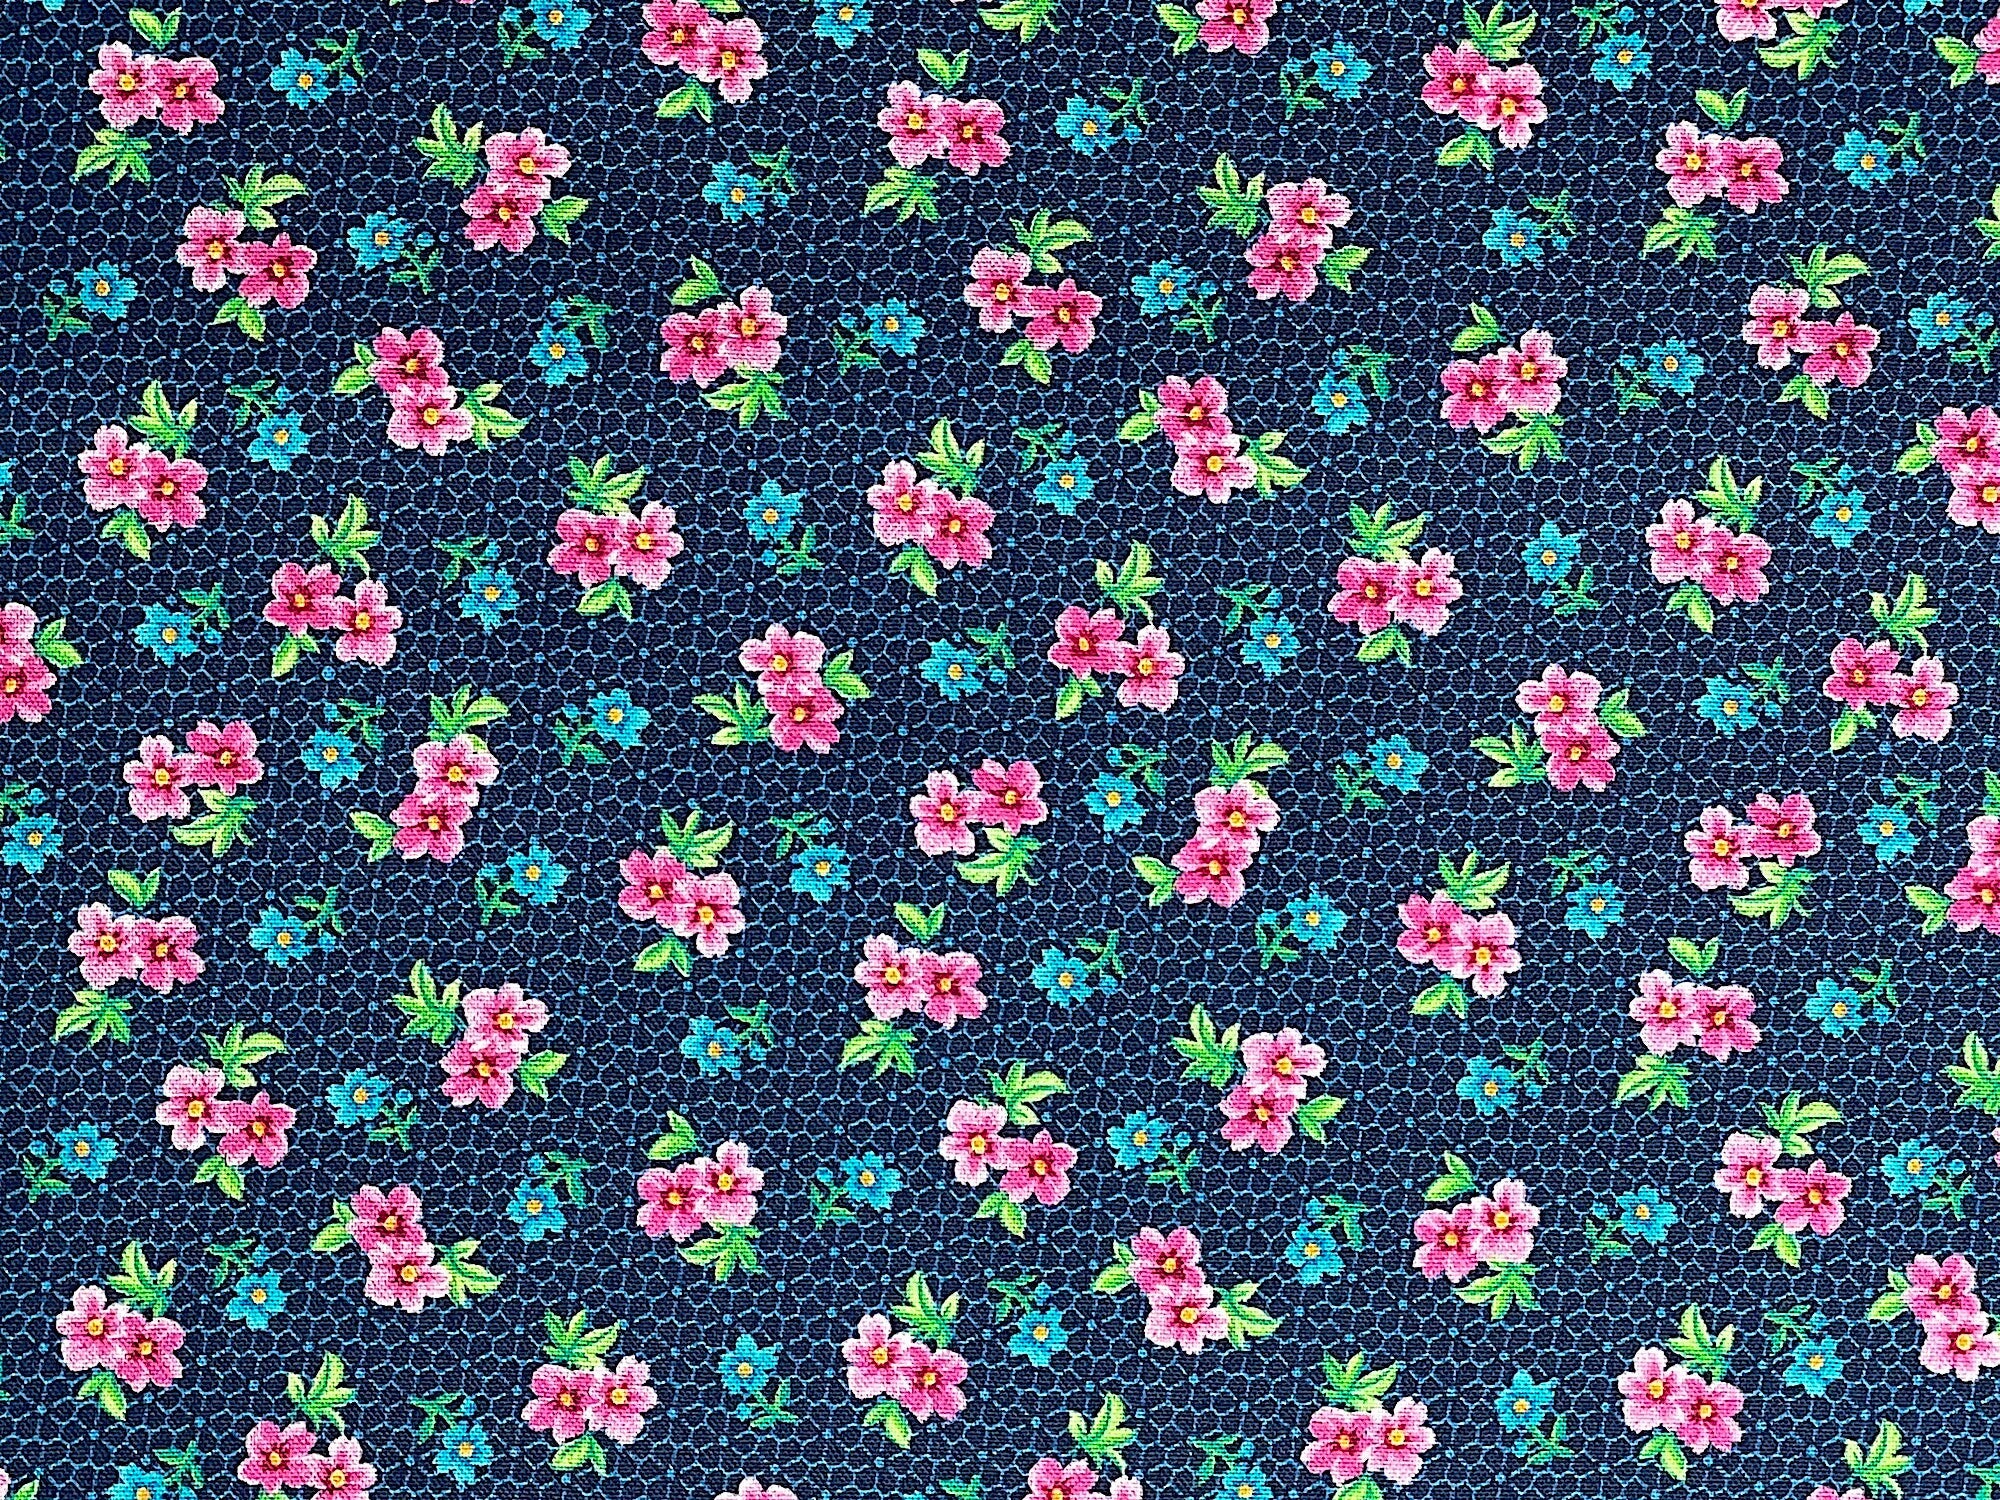 This fabric is part of the Floral Cache collection by QT fabrics. This blue fabric is covered with small red and blue flowers and green leaves